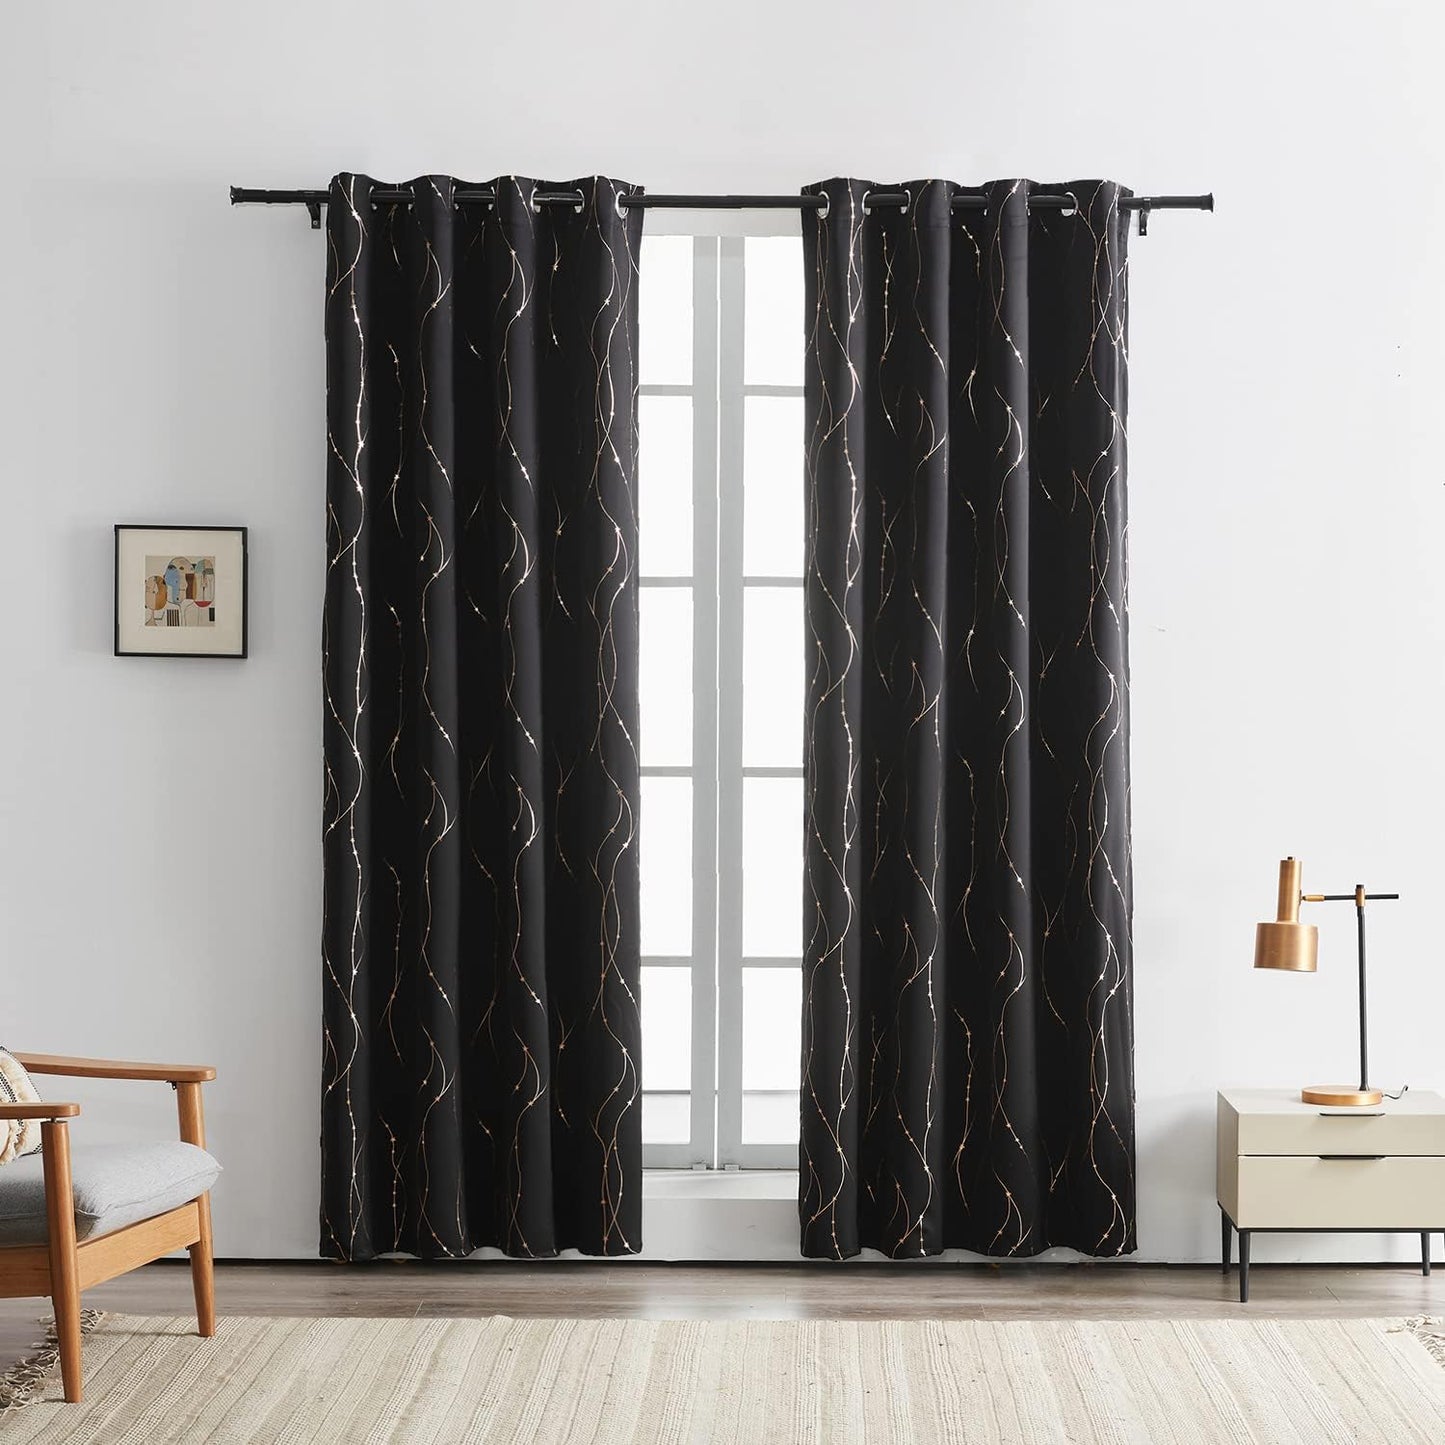 SMILE WEAVER Black Blackout Curtains for Bedroom 72 Inch Long 2 Panels,Room Darkening Curtain with Gold Print Design Noise Reducing Thermal Insulated Window Treatment Drapes for Living Room  SMILE WEAVER   